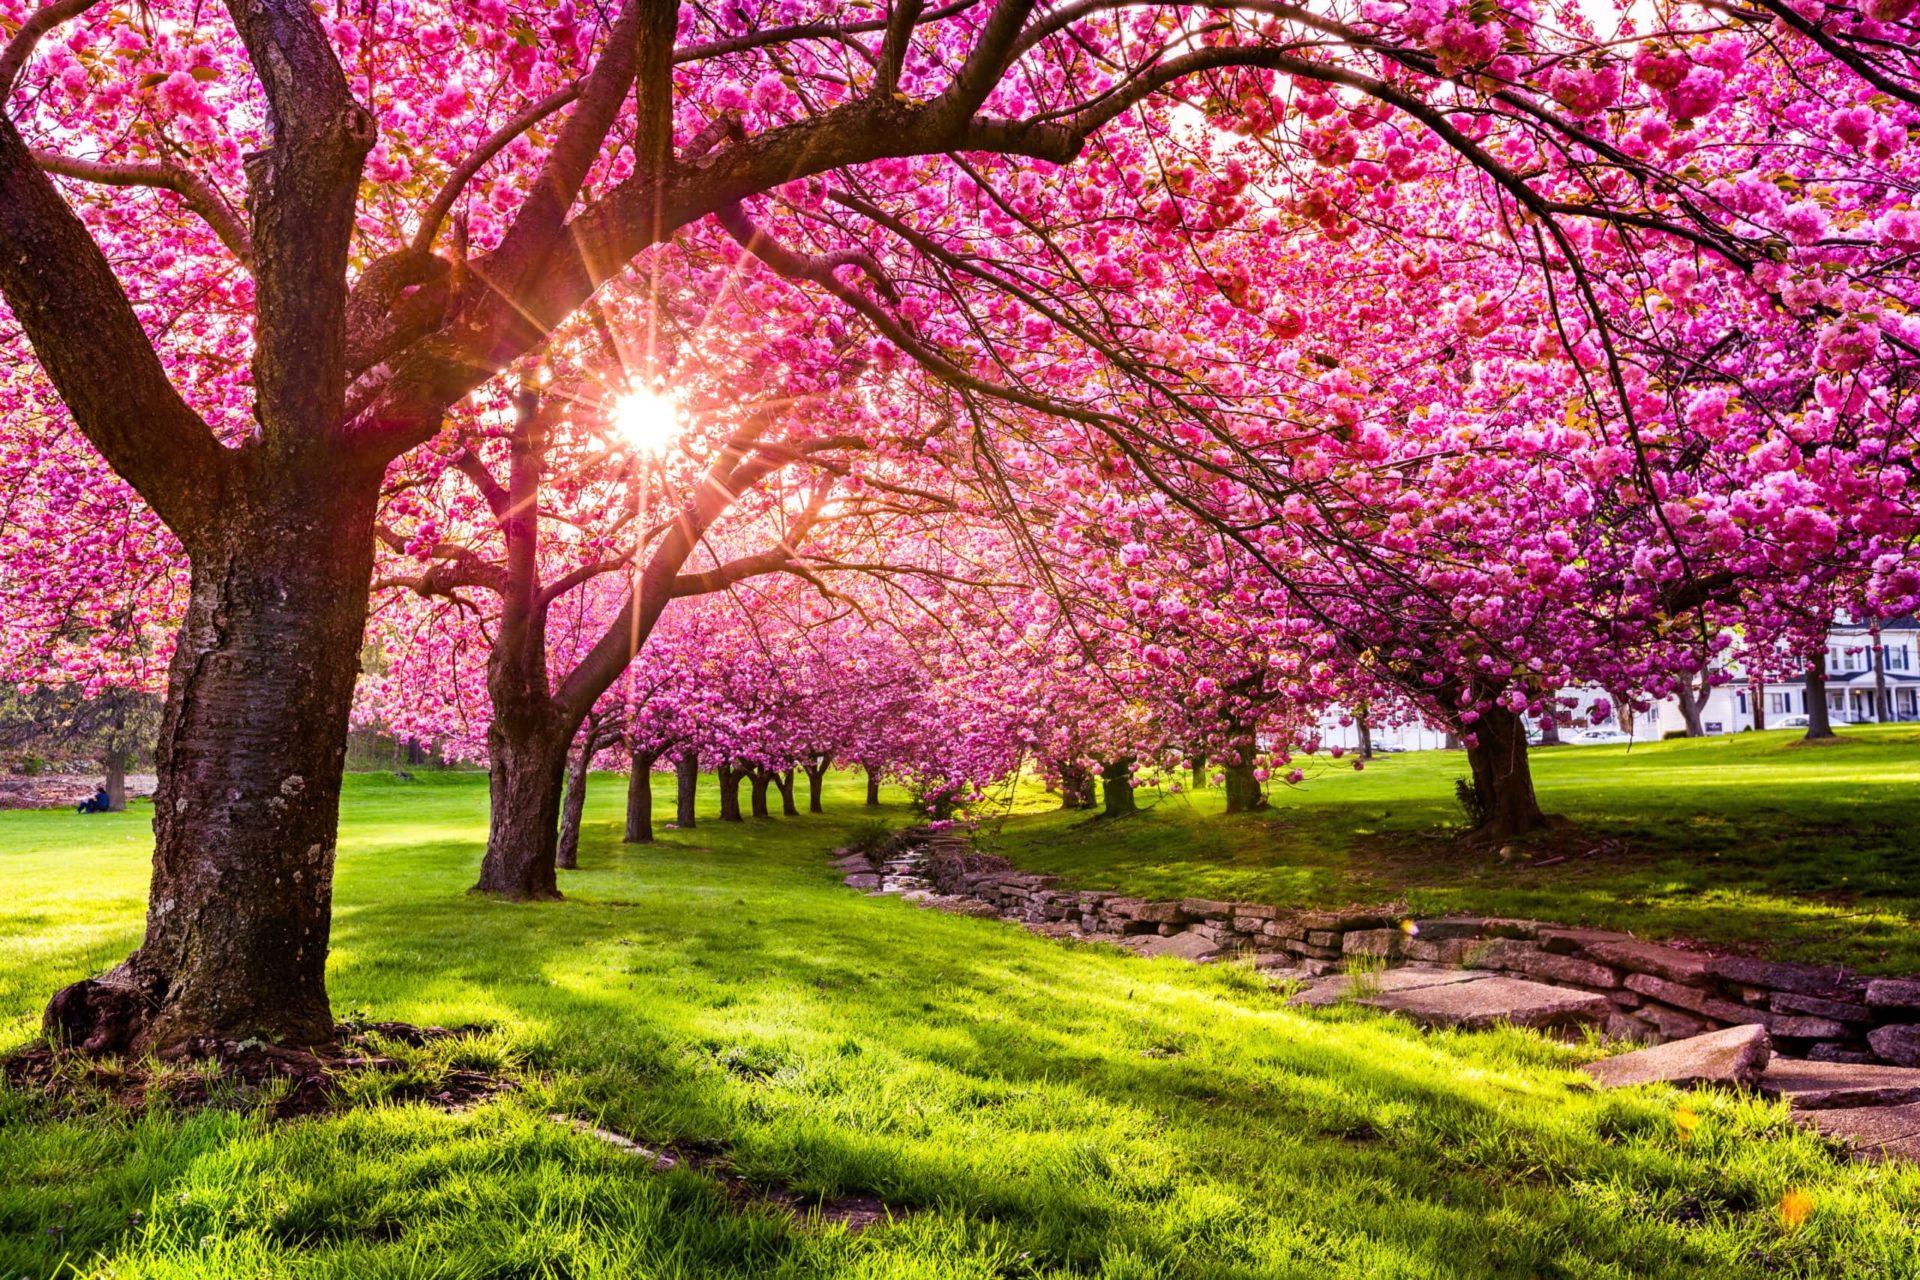 16 Cherry Blossoms Facts - Cherry Blossoms and Blossom Tree Trivia